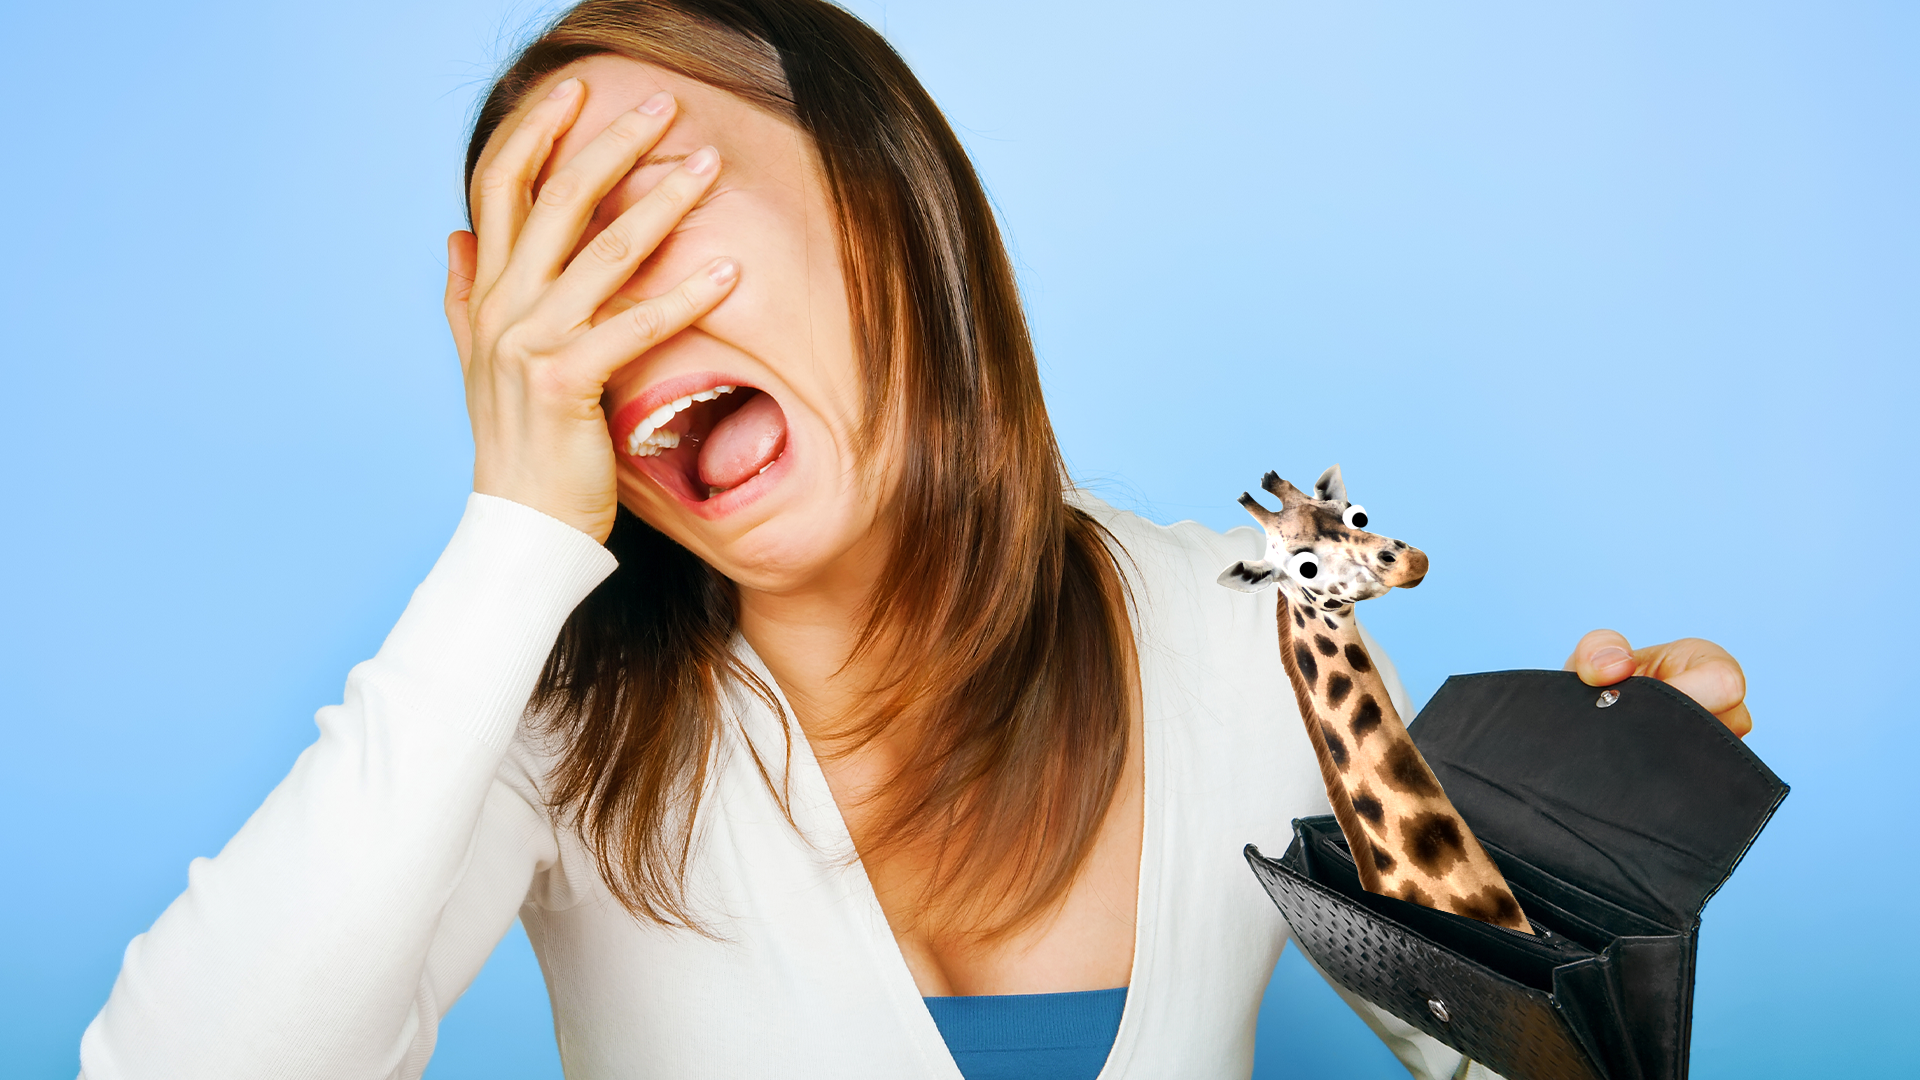 Distraught woman with empty purse with giraffe peering out